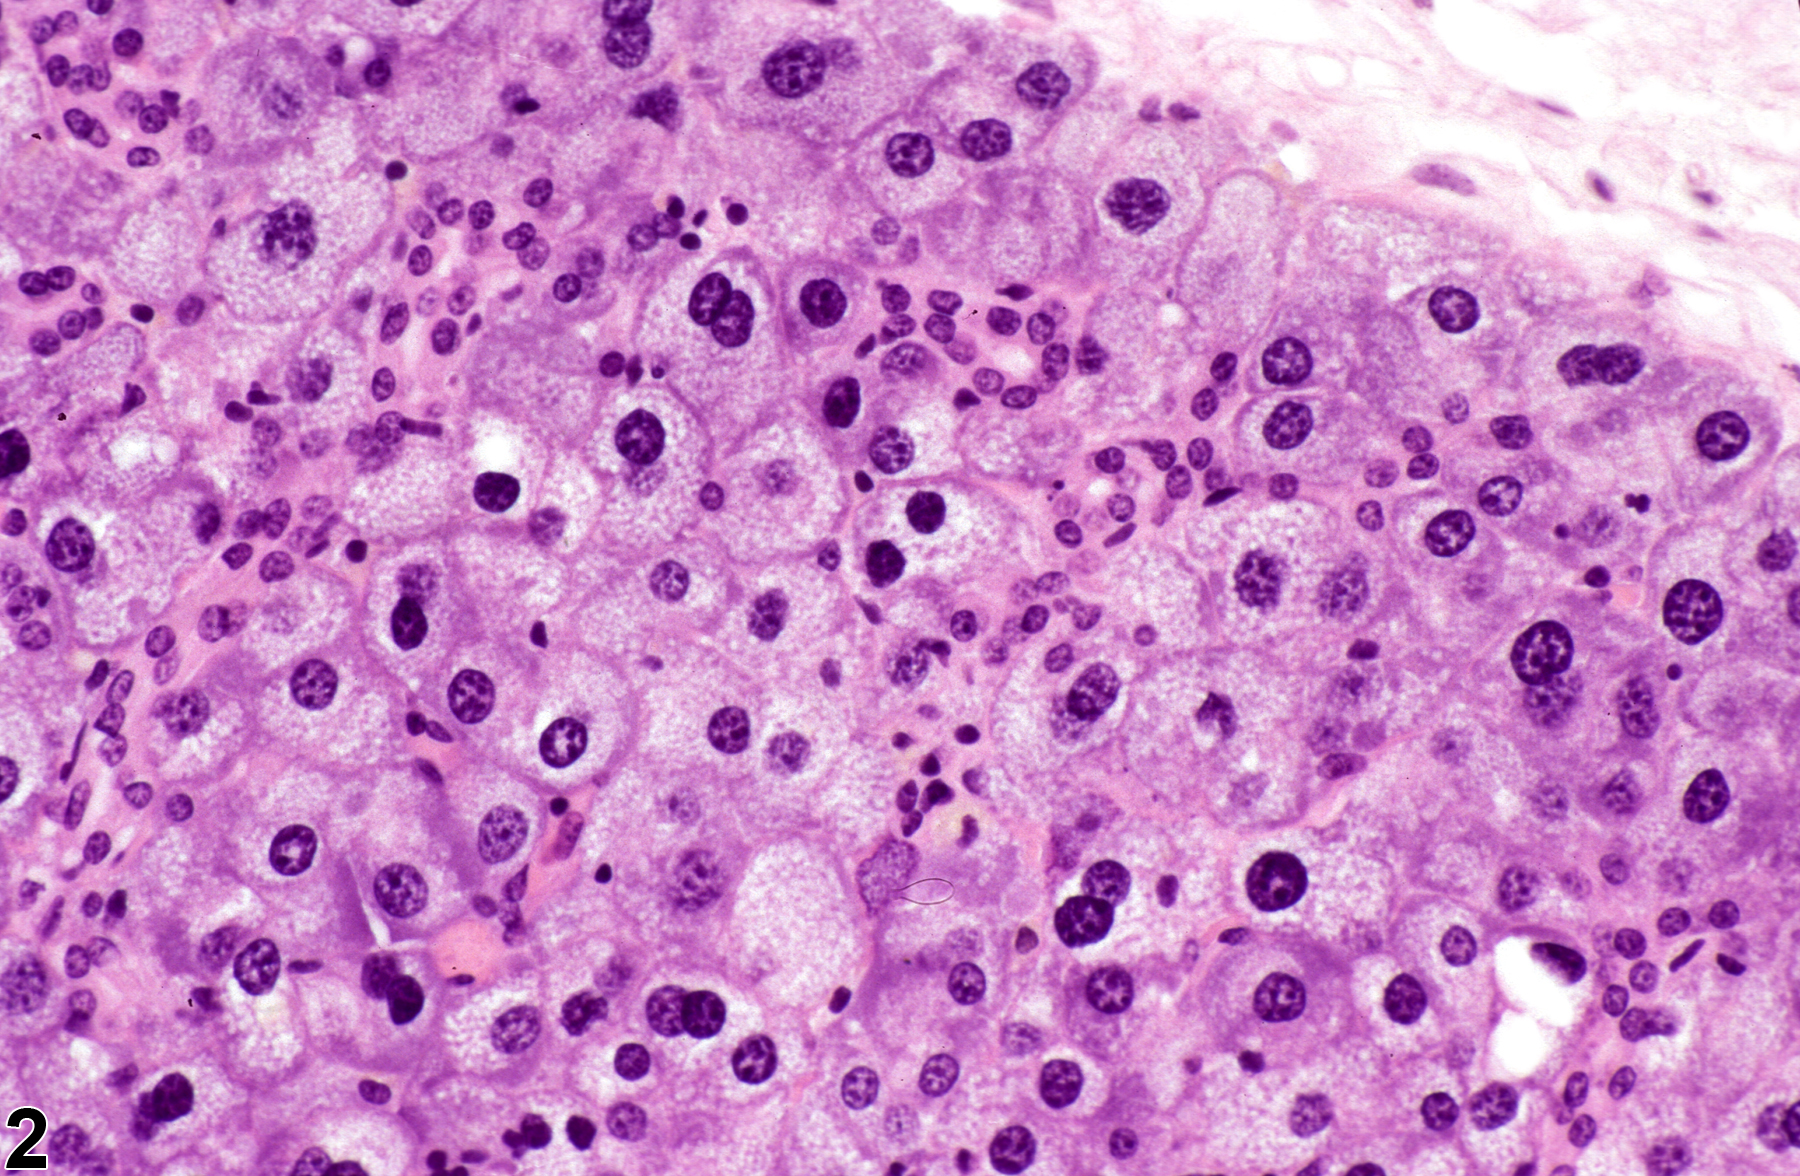 Image of karyomegaly in the salivary gland from a male B6C3F1 mouse in a chronic study